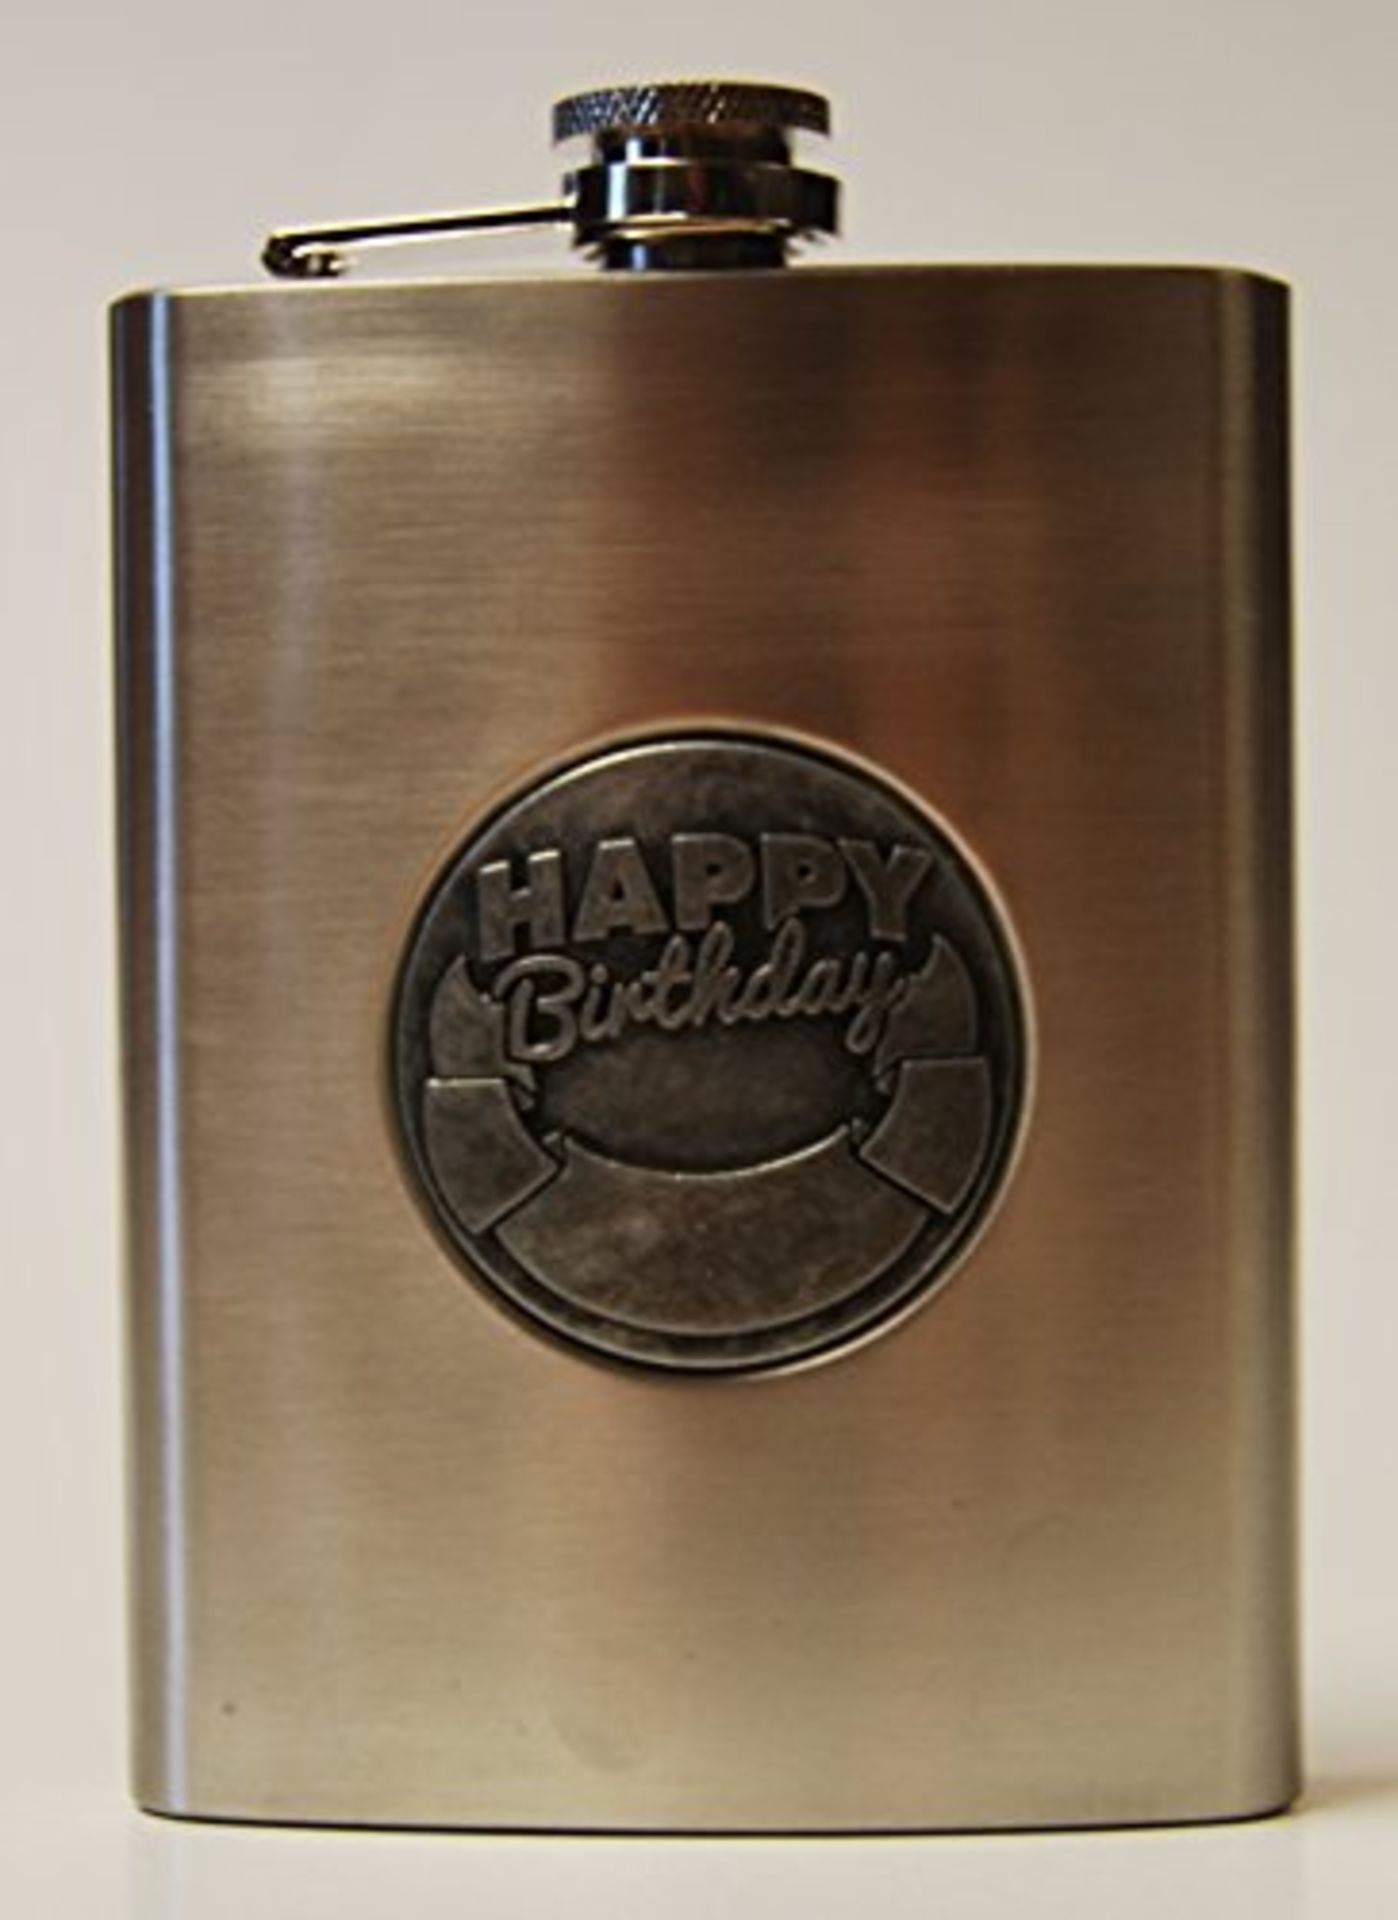 V Brand New Happy Birthday Hip Flask X 2 YOUR BID PRICE TO BE MULTIPLIED BY TWO